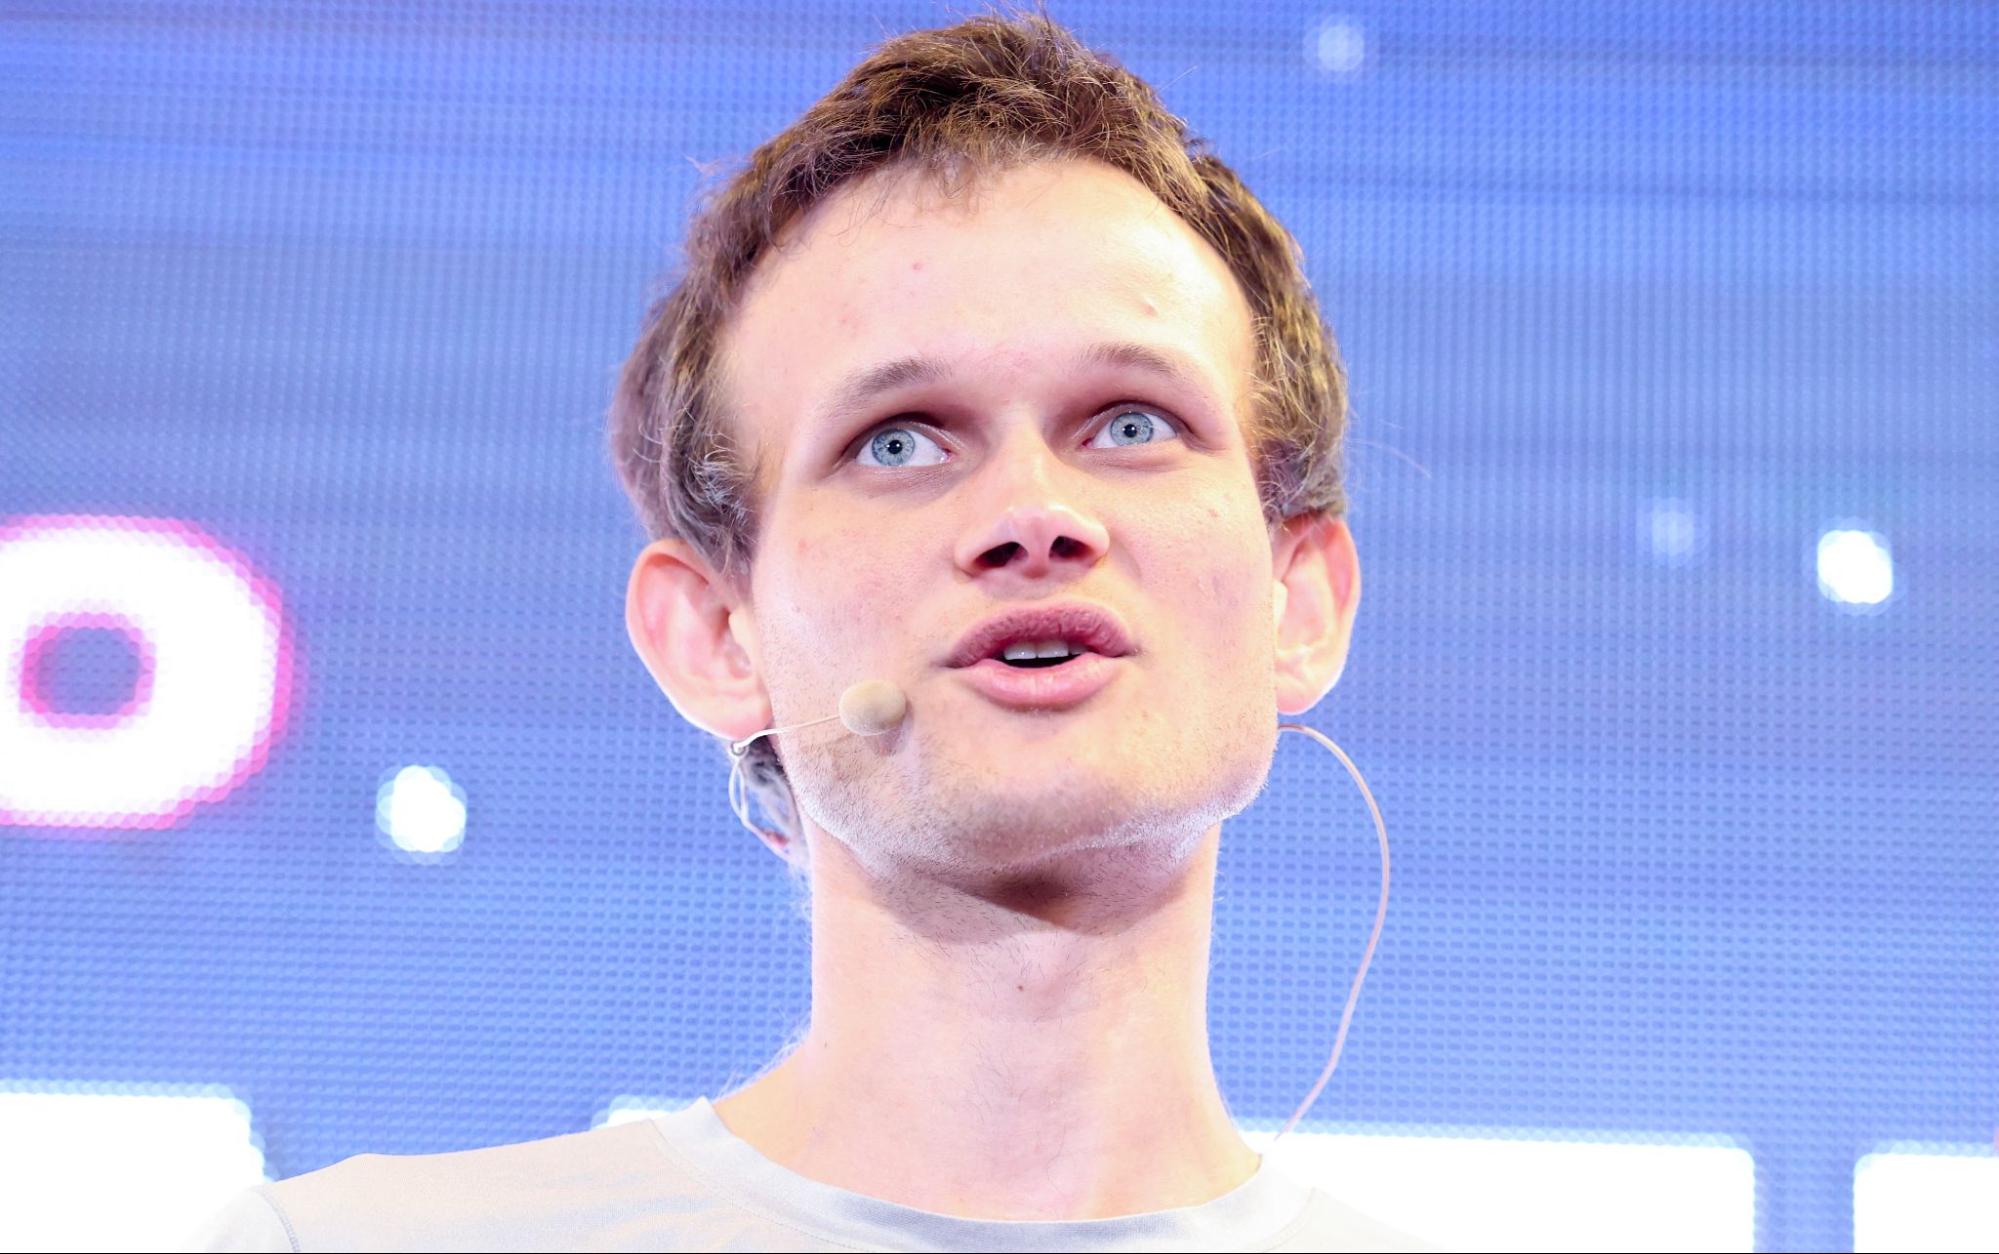 Our chat with Ethereum's Vitalik Buterin